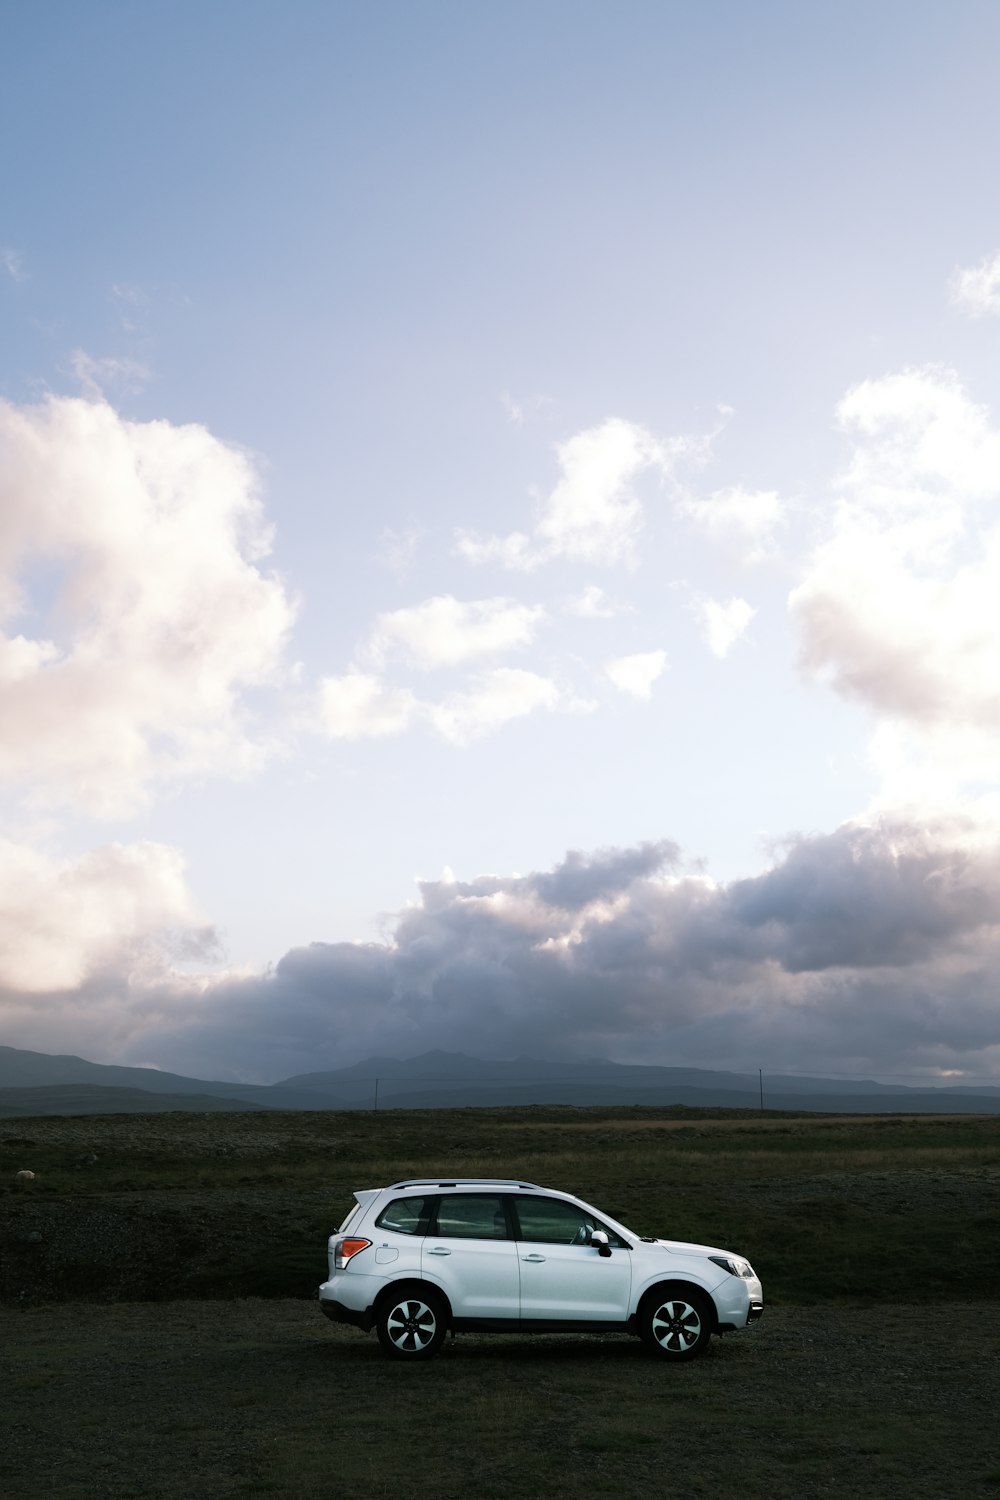 a white car parked in a field under a cloudy sky